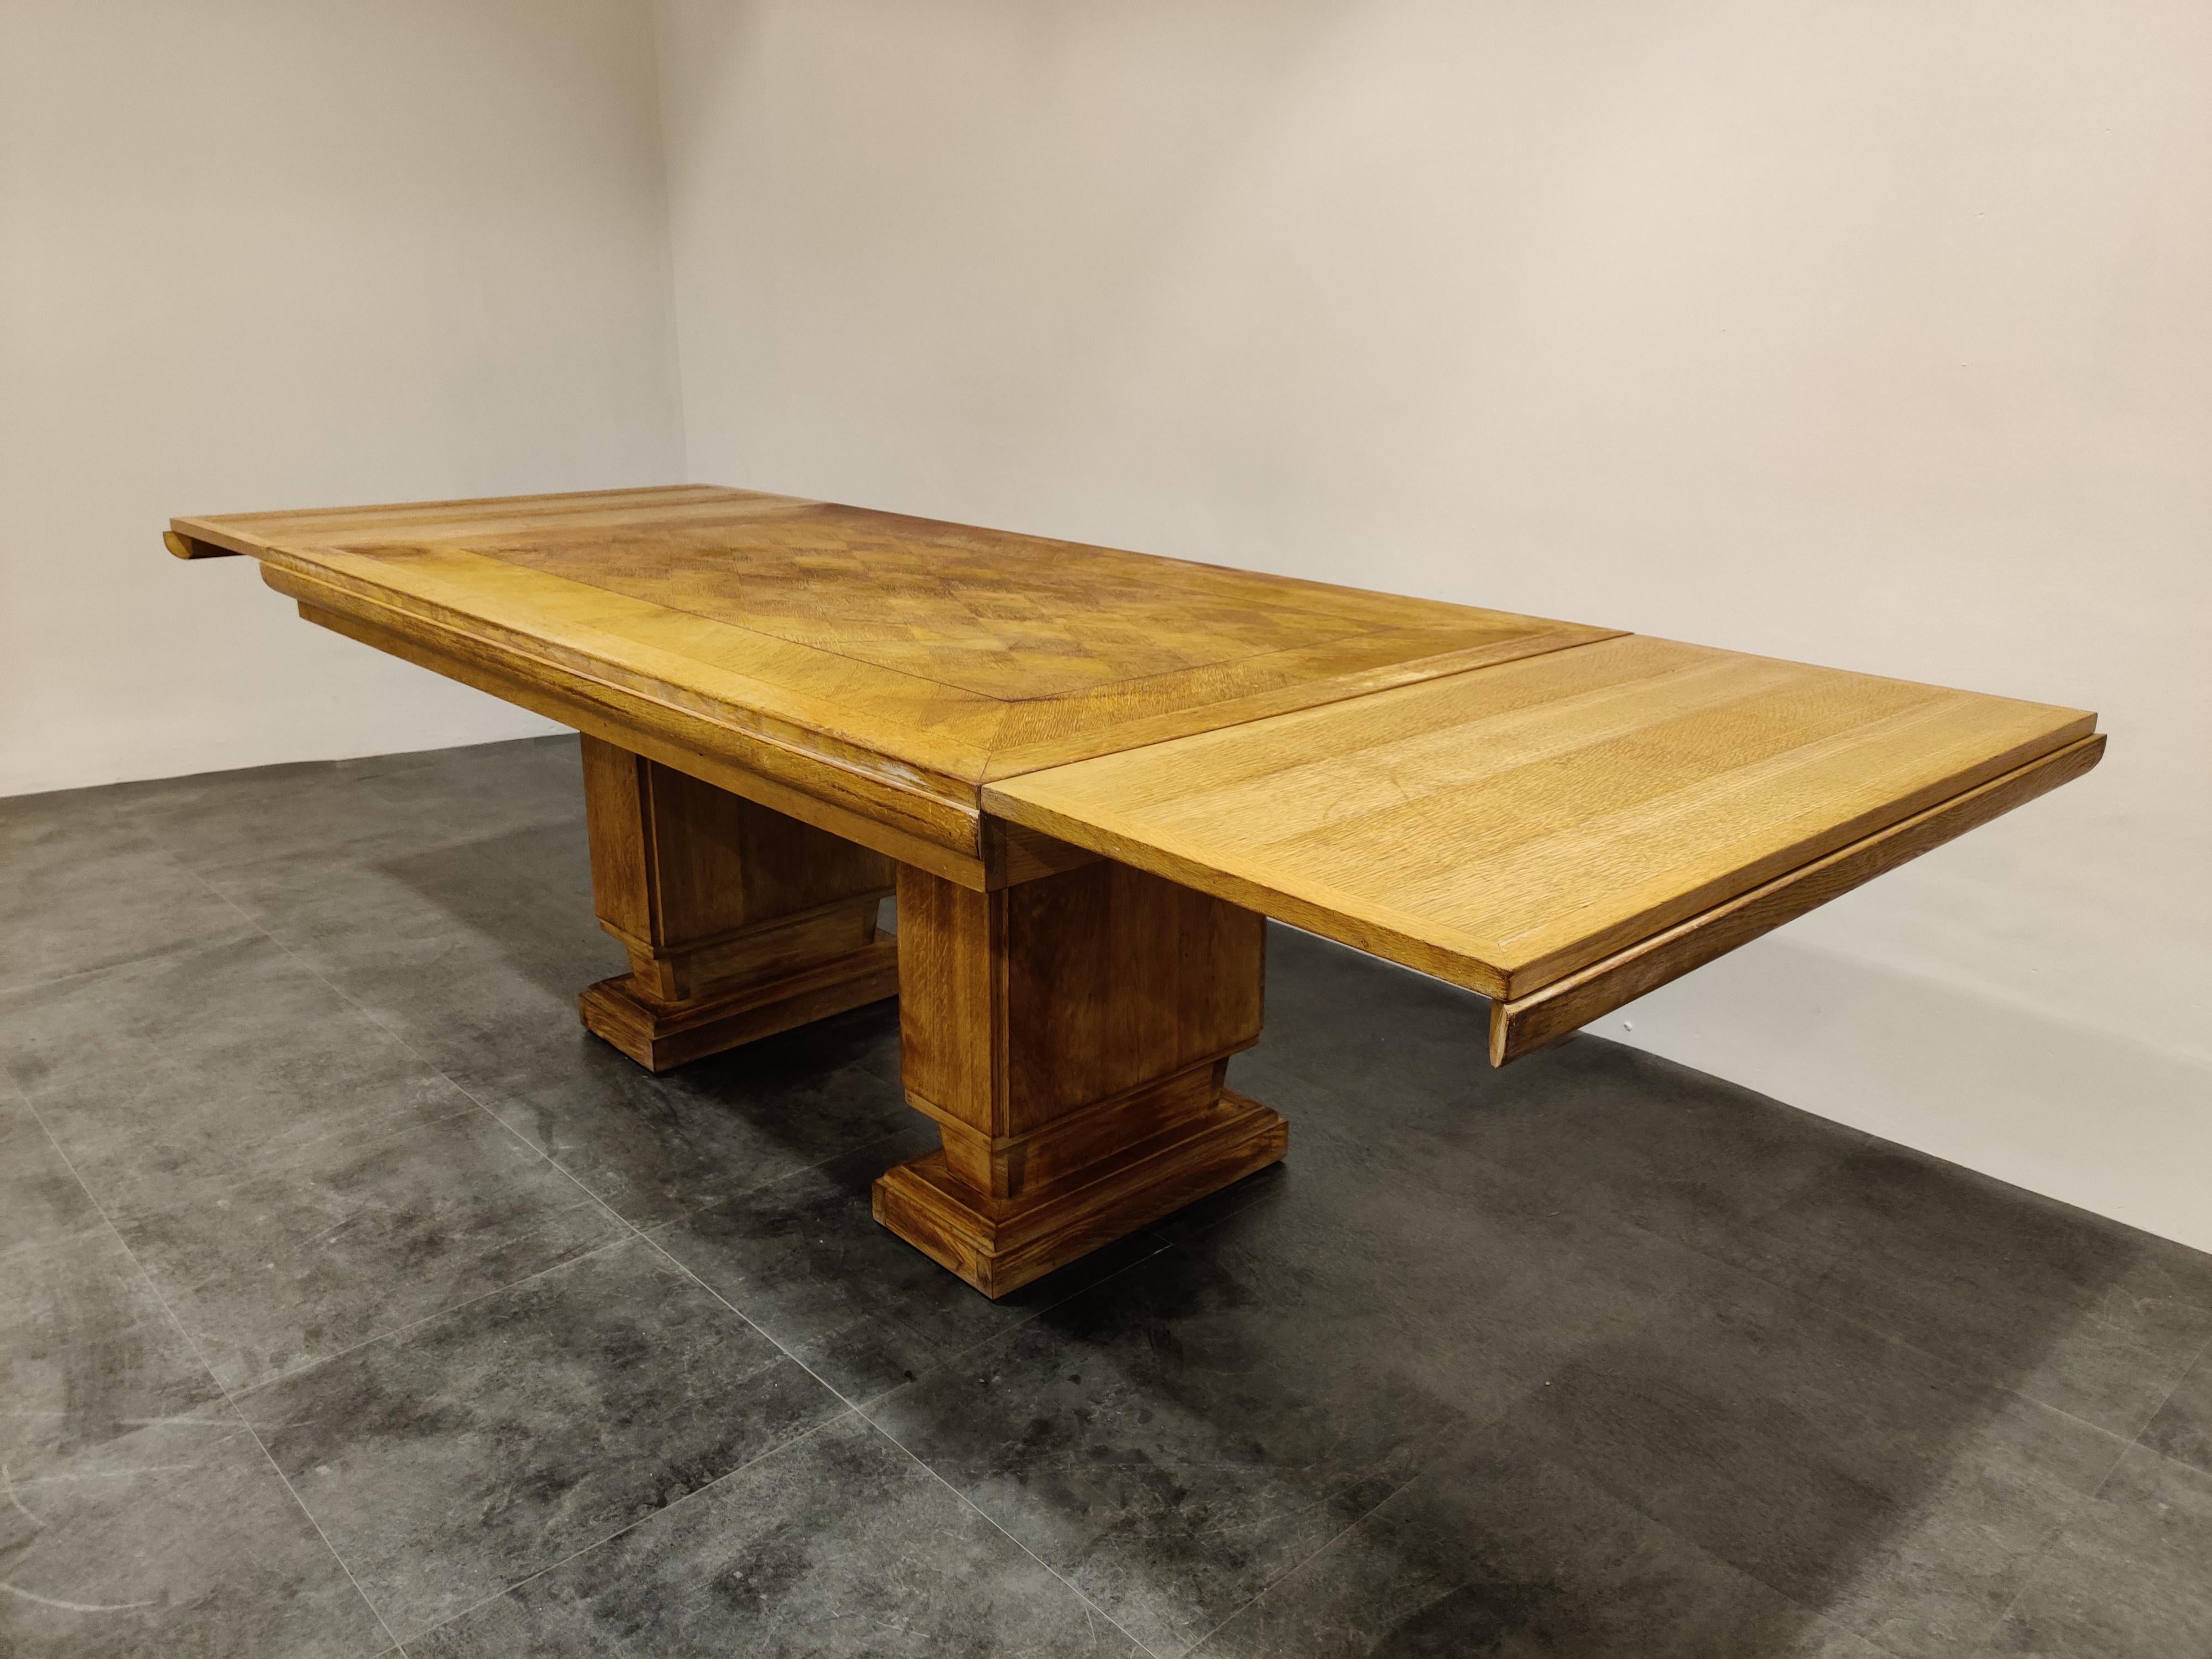 Beautiful modernist Art Deco dining table by Gaston Poisson.

The table can be extended from 170 to 270 cm.

Beautiful Art Deco design and very good quality.

1940s, France

Measures: Height 74cm/29.13